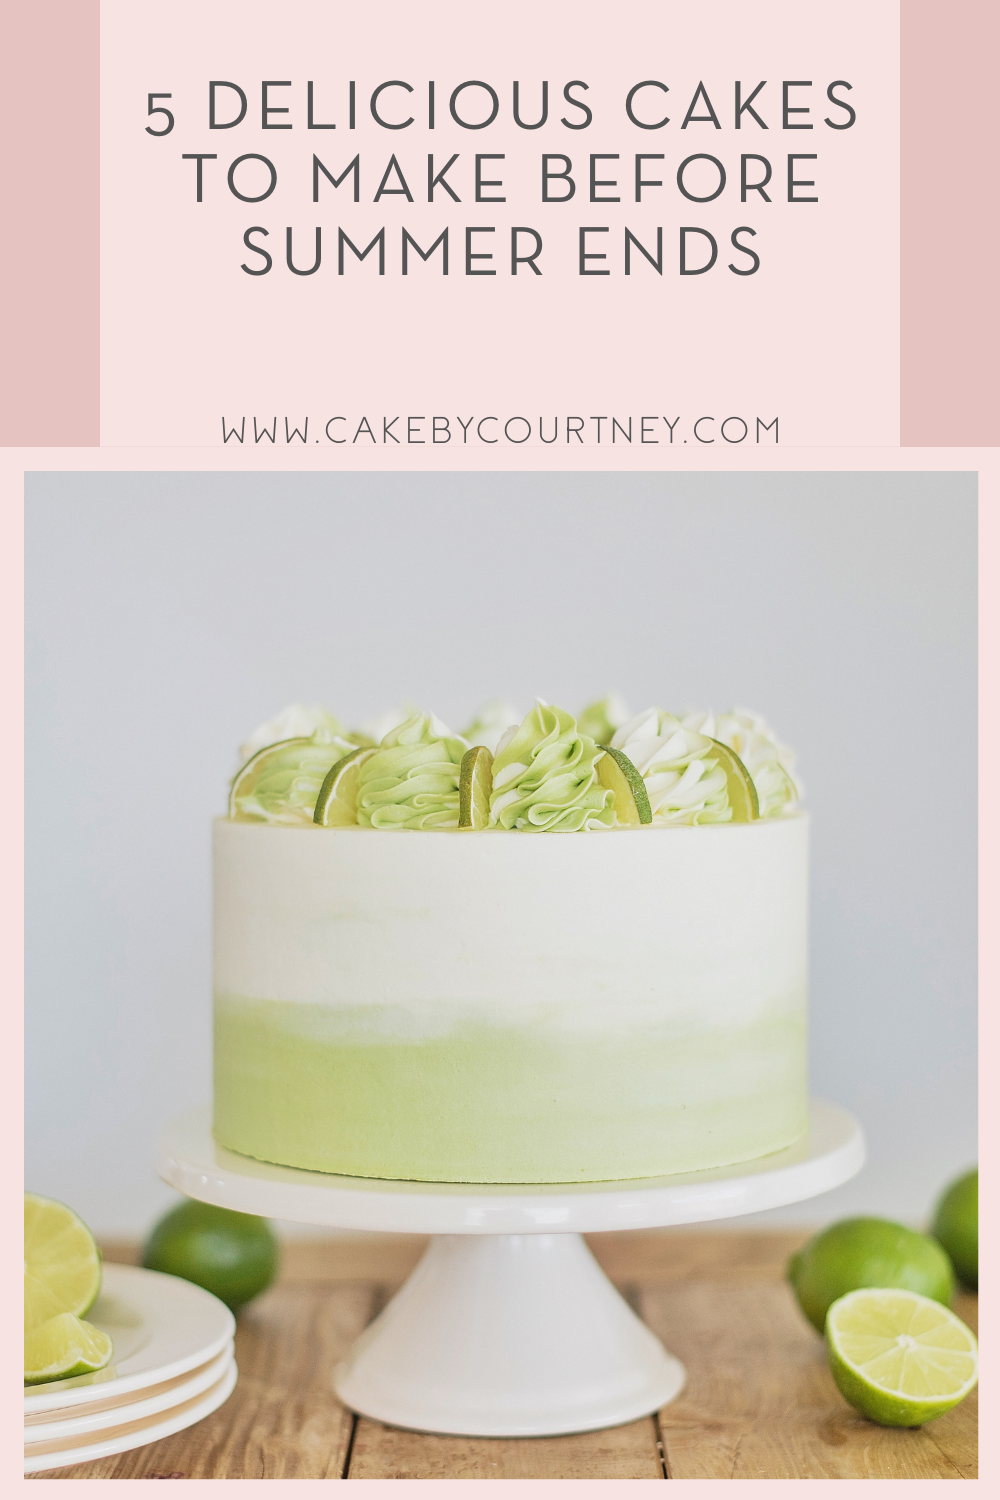 5 delicious cakes to make before summer ends. www.cakebycourtney.com